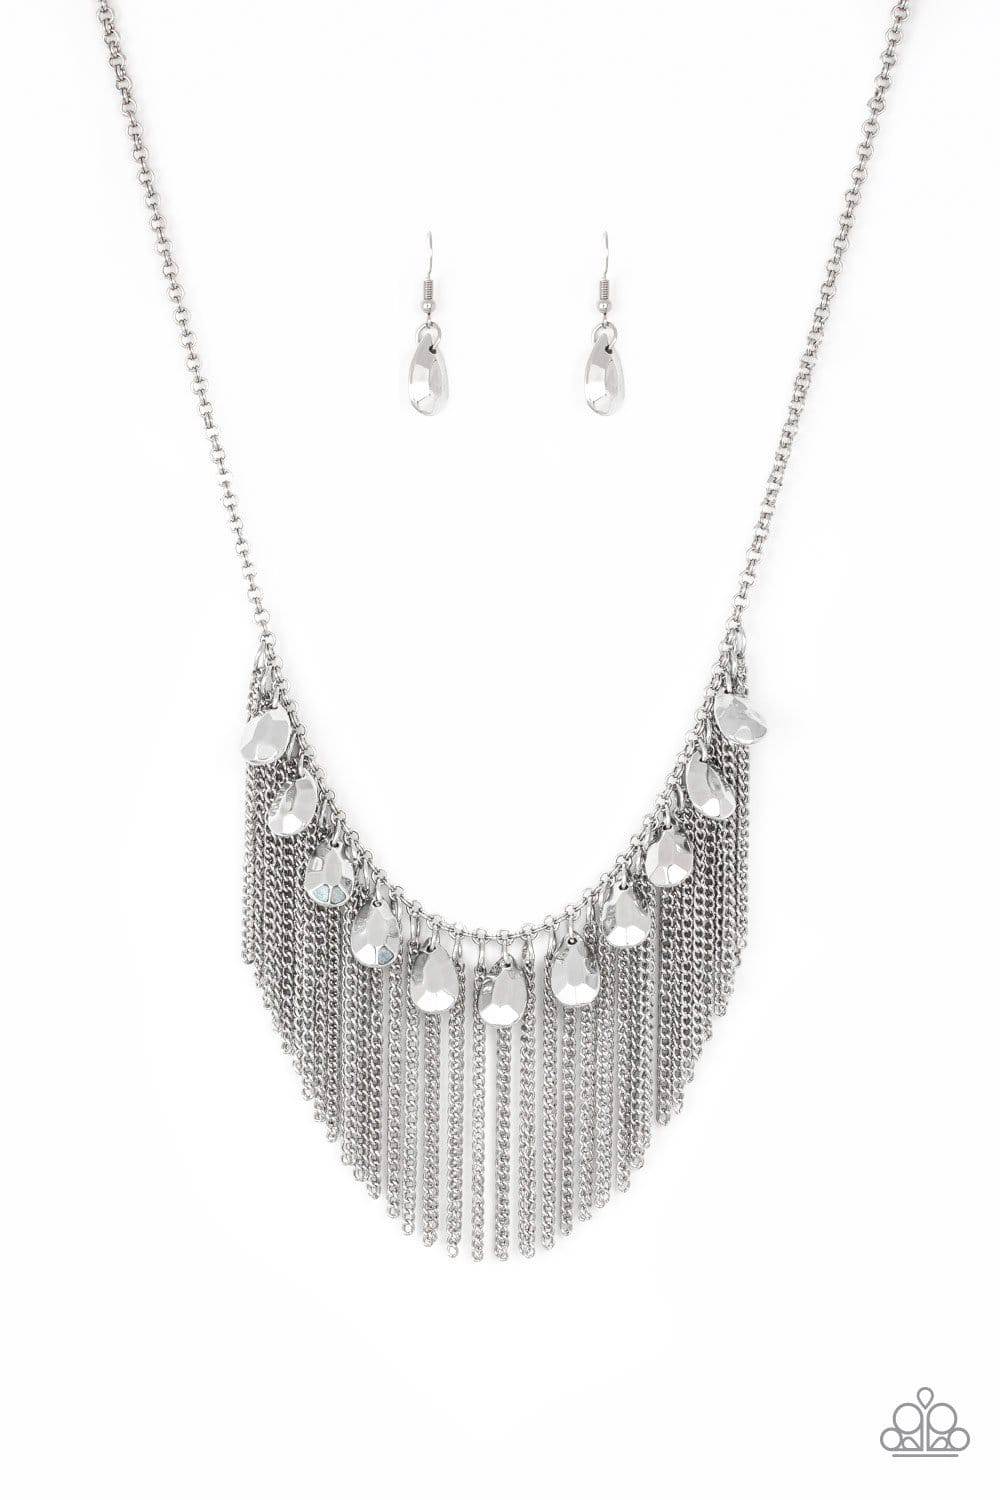 A259 - Bragging Rights Silver Necklace by Paparazzi Accessories on Fancy5Fashion.com